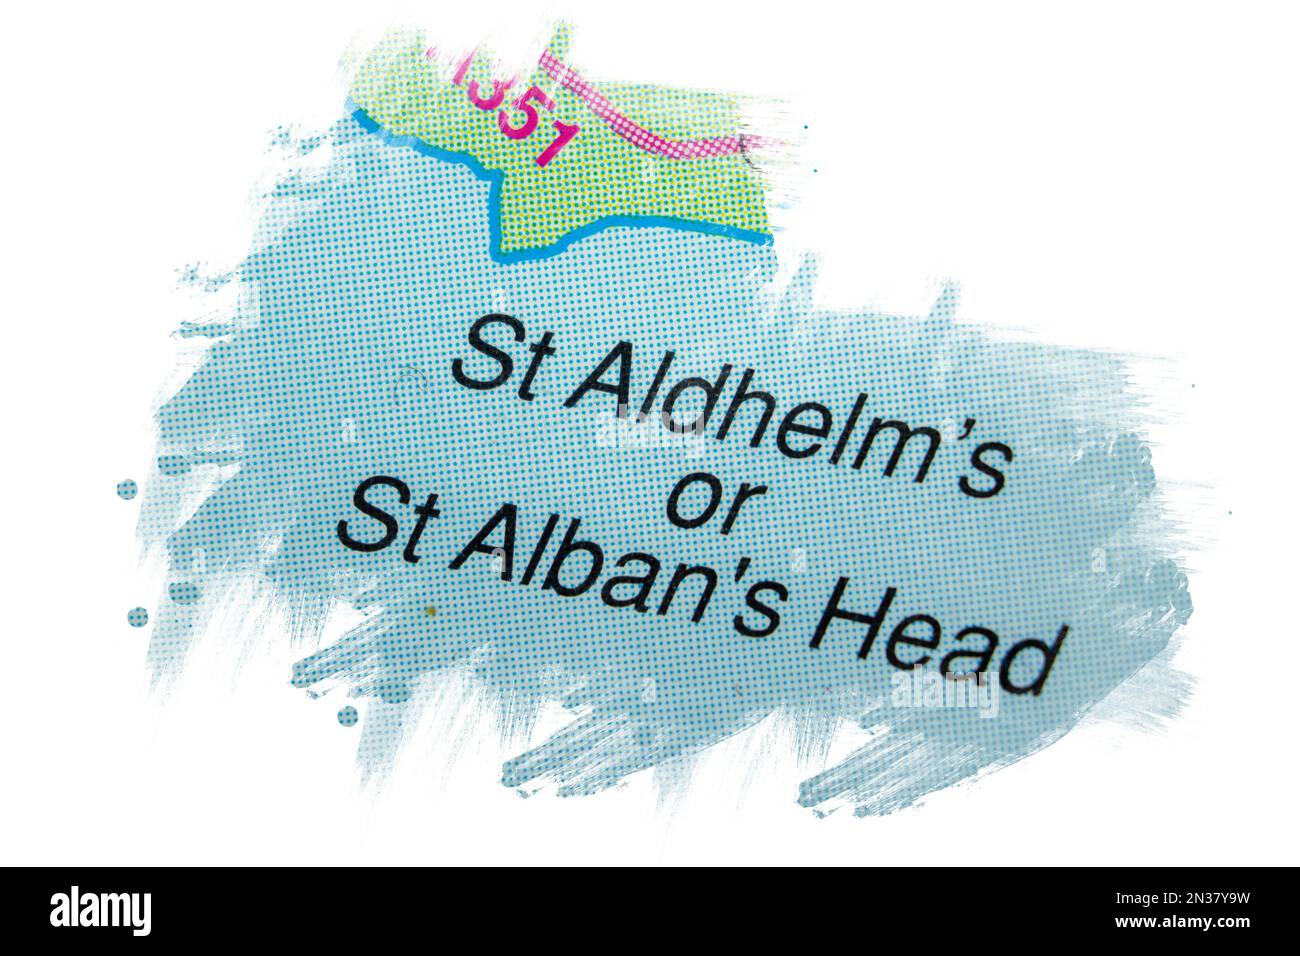 St Aldhelm's or St Alban's Head, United Kingdom atlas map town name - paint Stock Photo